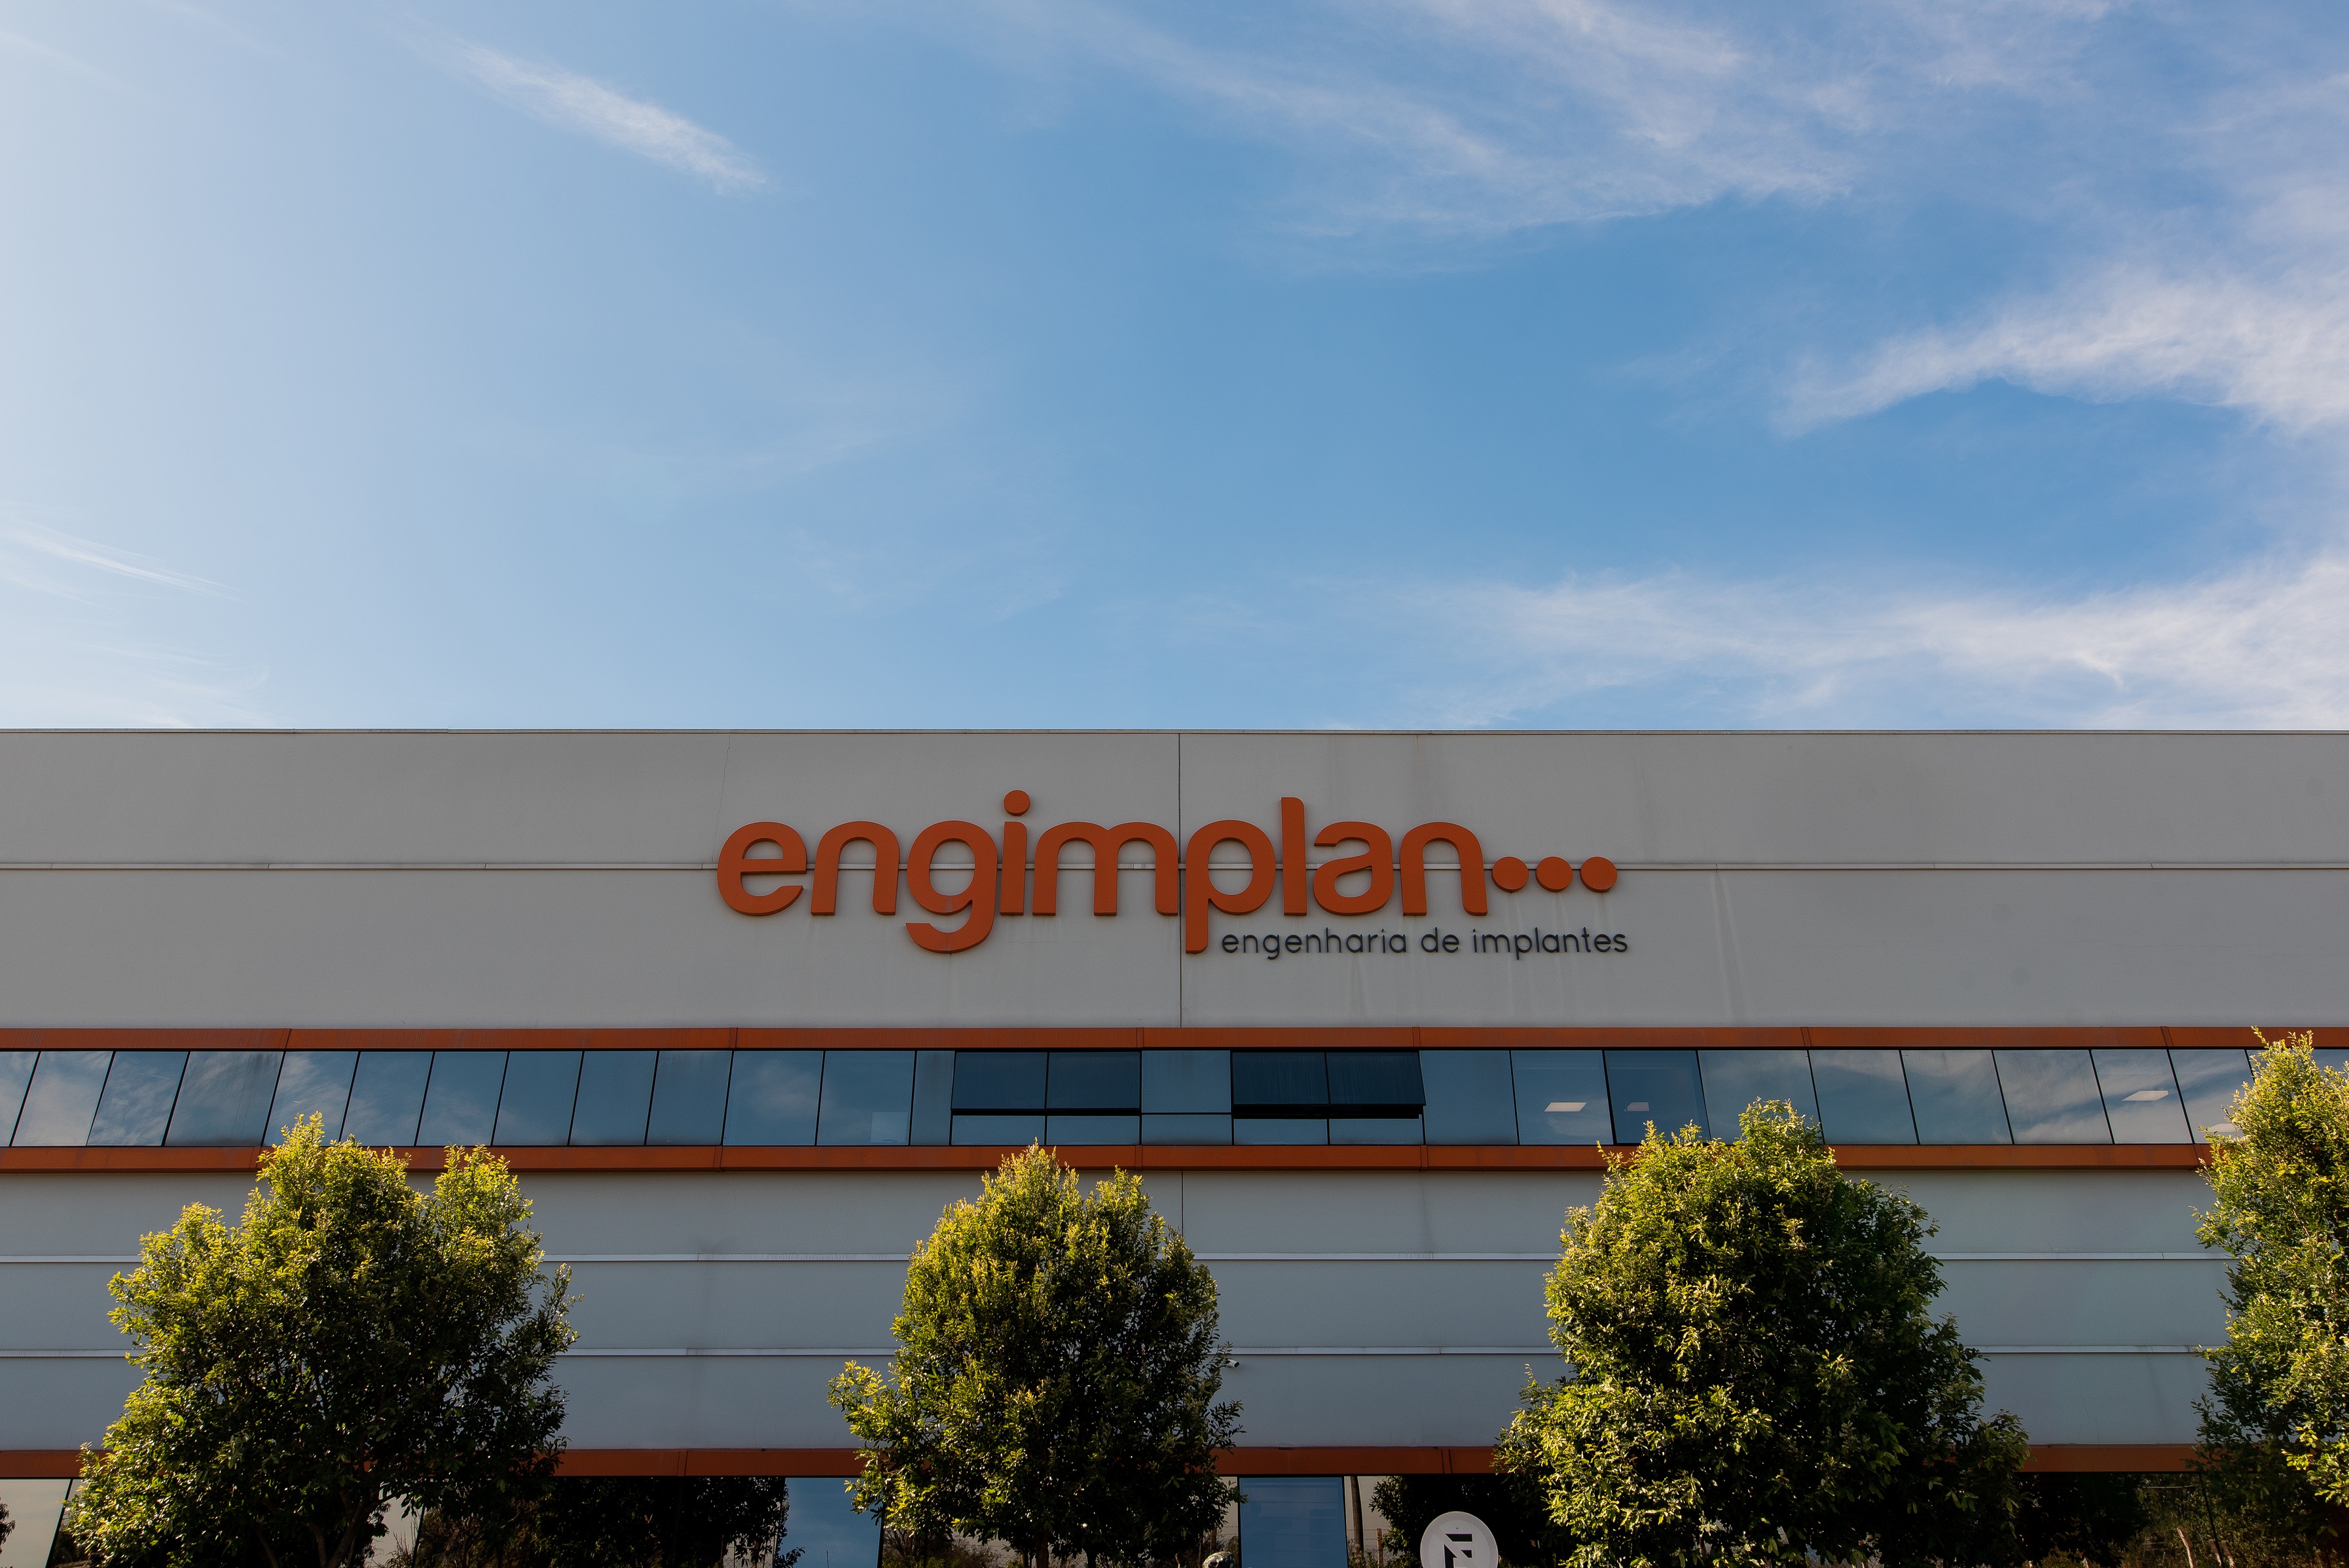 The Engimplan office. Photo via Materialise.